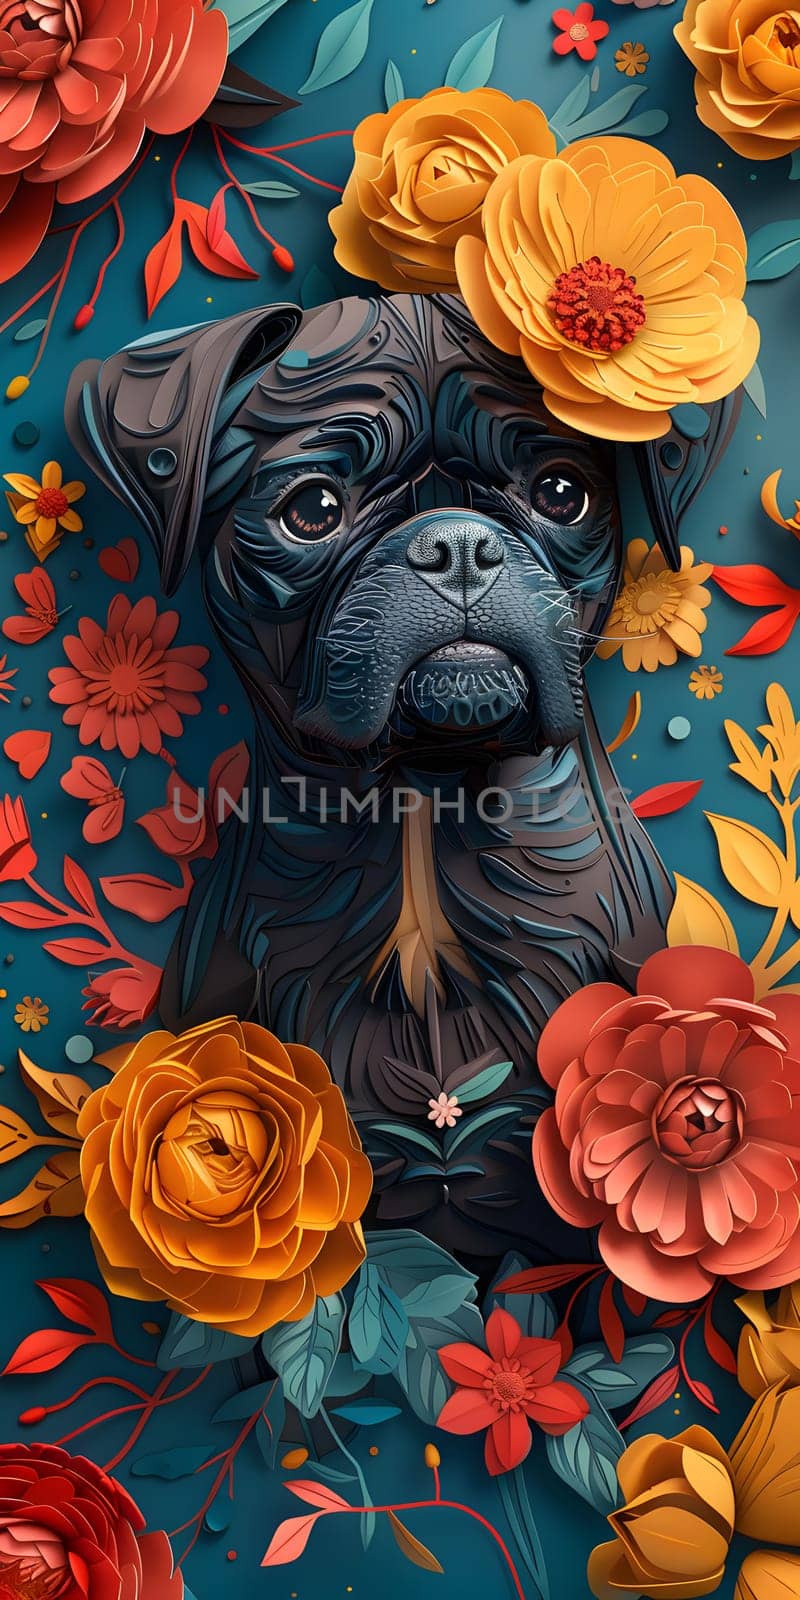 A pug dog, a small dog breed, is depicted surrounded by orange flowers on a blue background in a beautiful piece of art